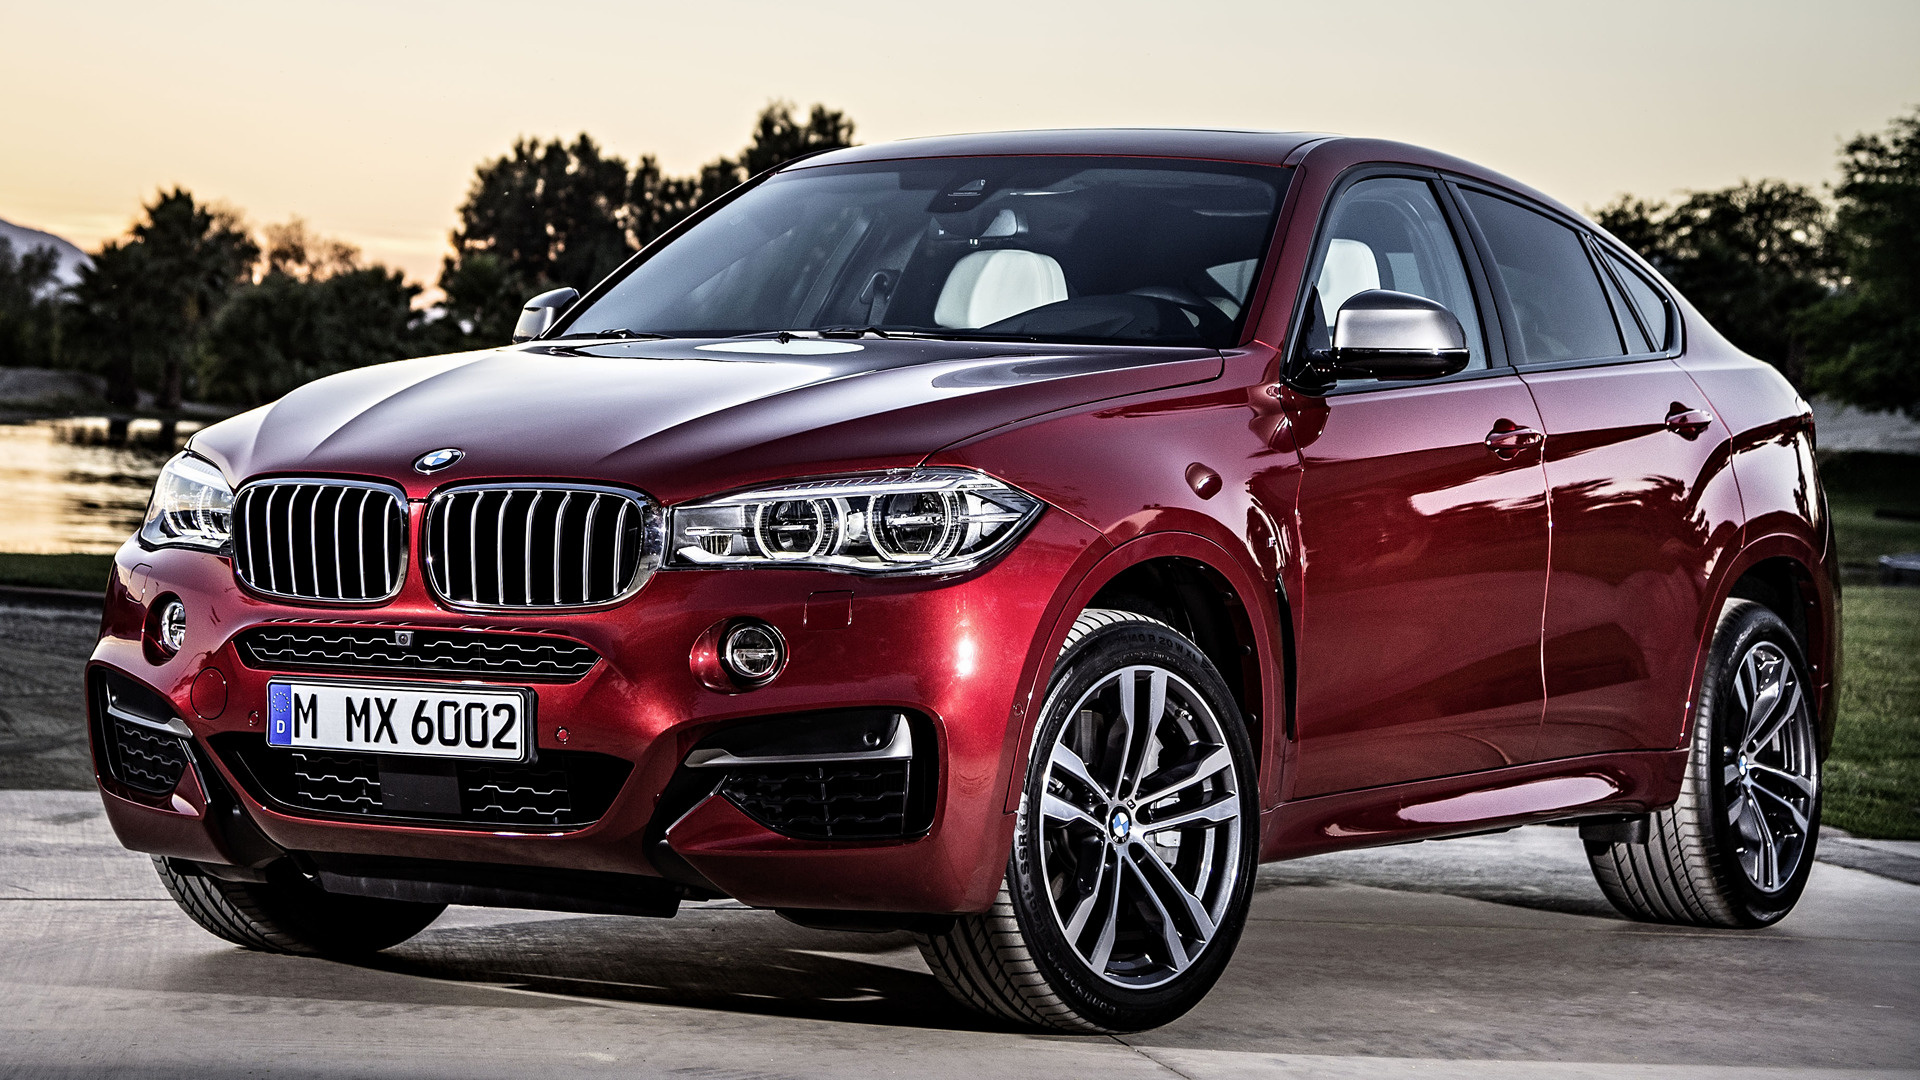 2015 Bmw X6 - Bmw X6 Price South Africa , HD Wallpaper & Backgrounds